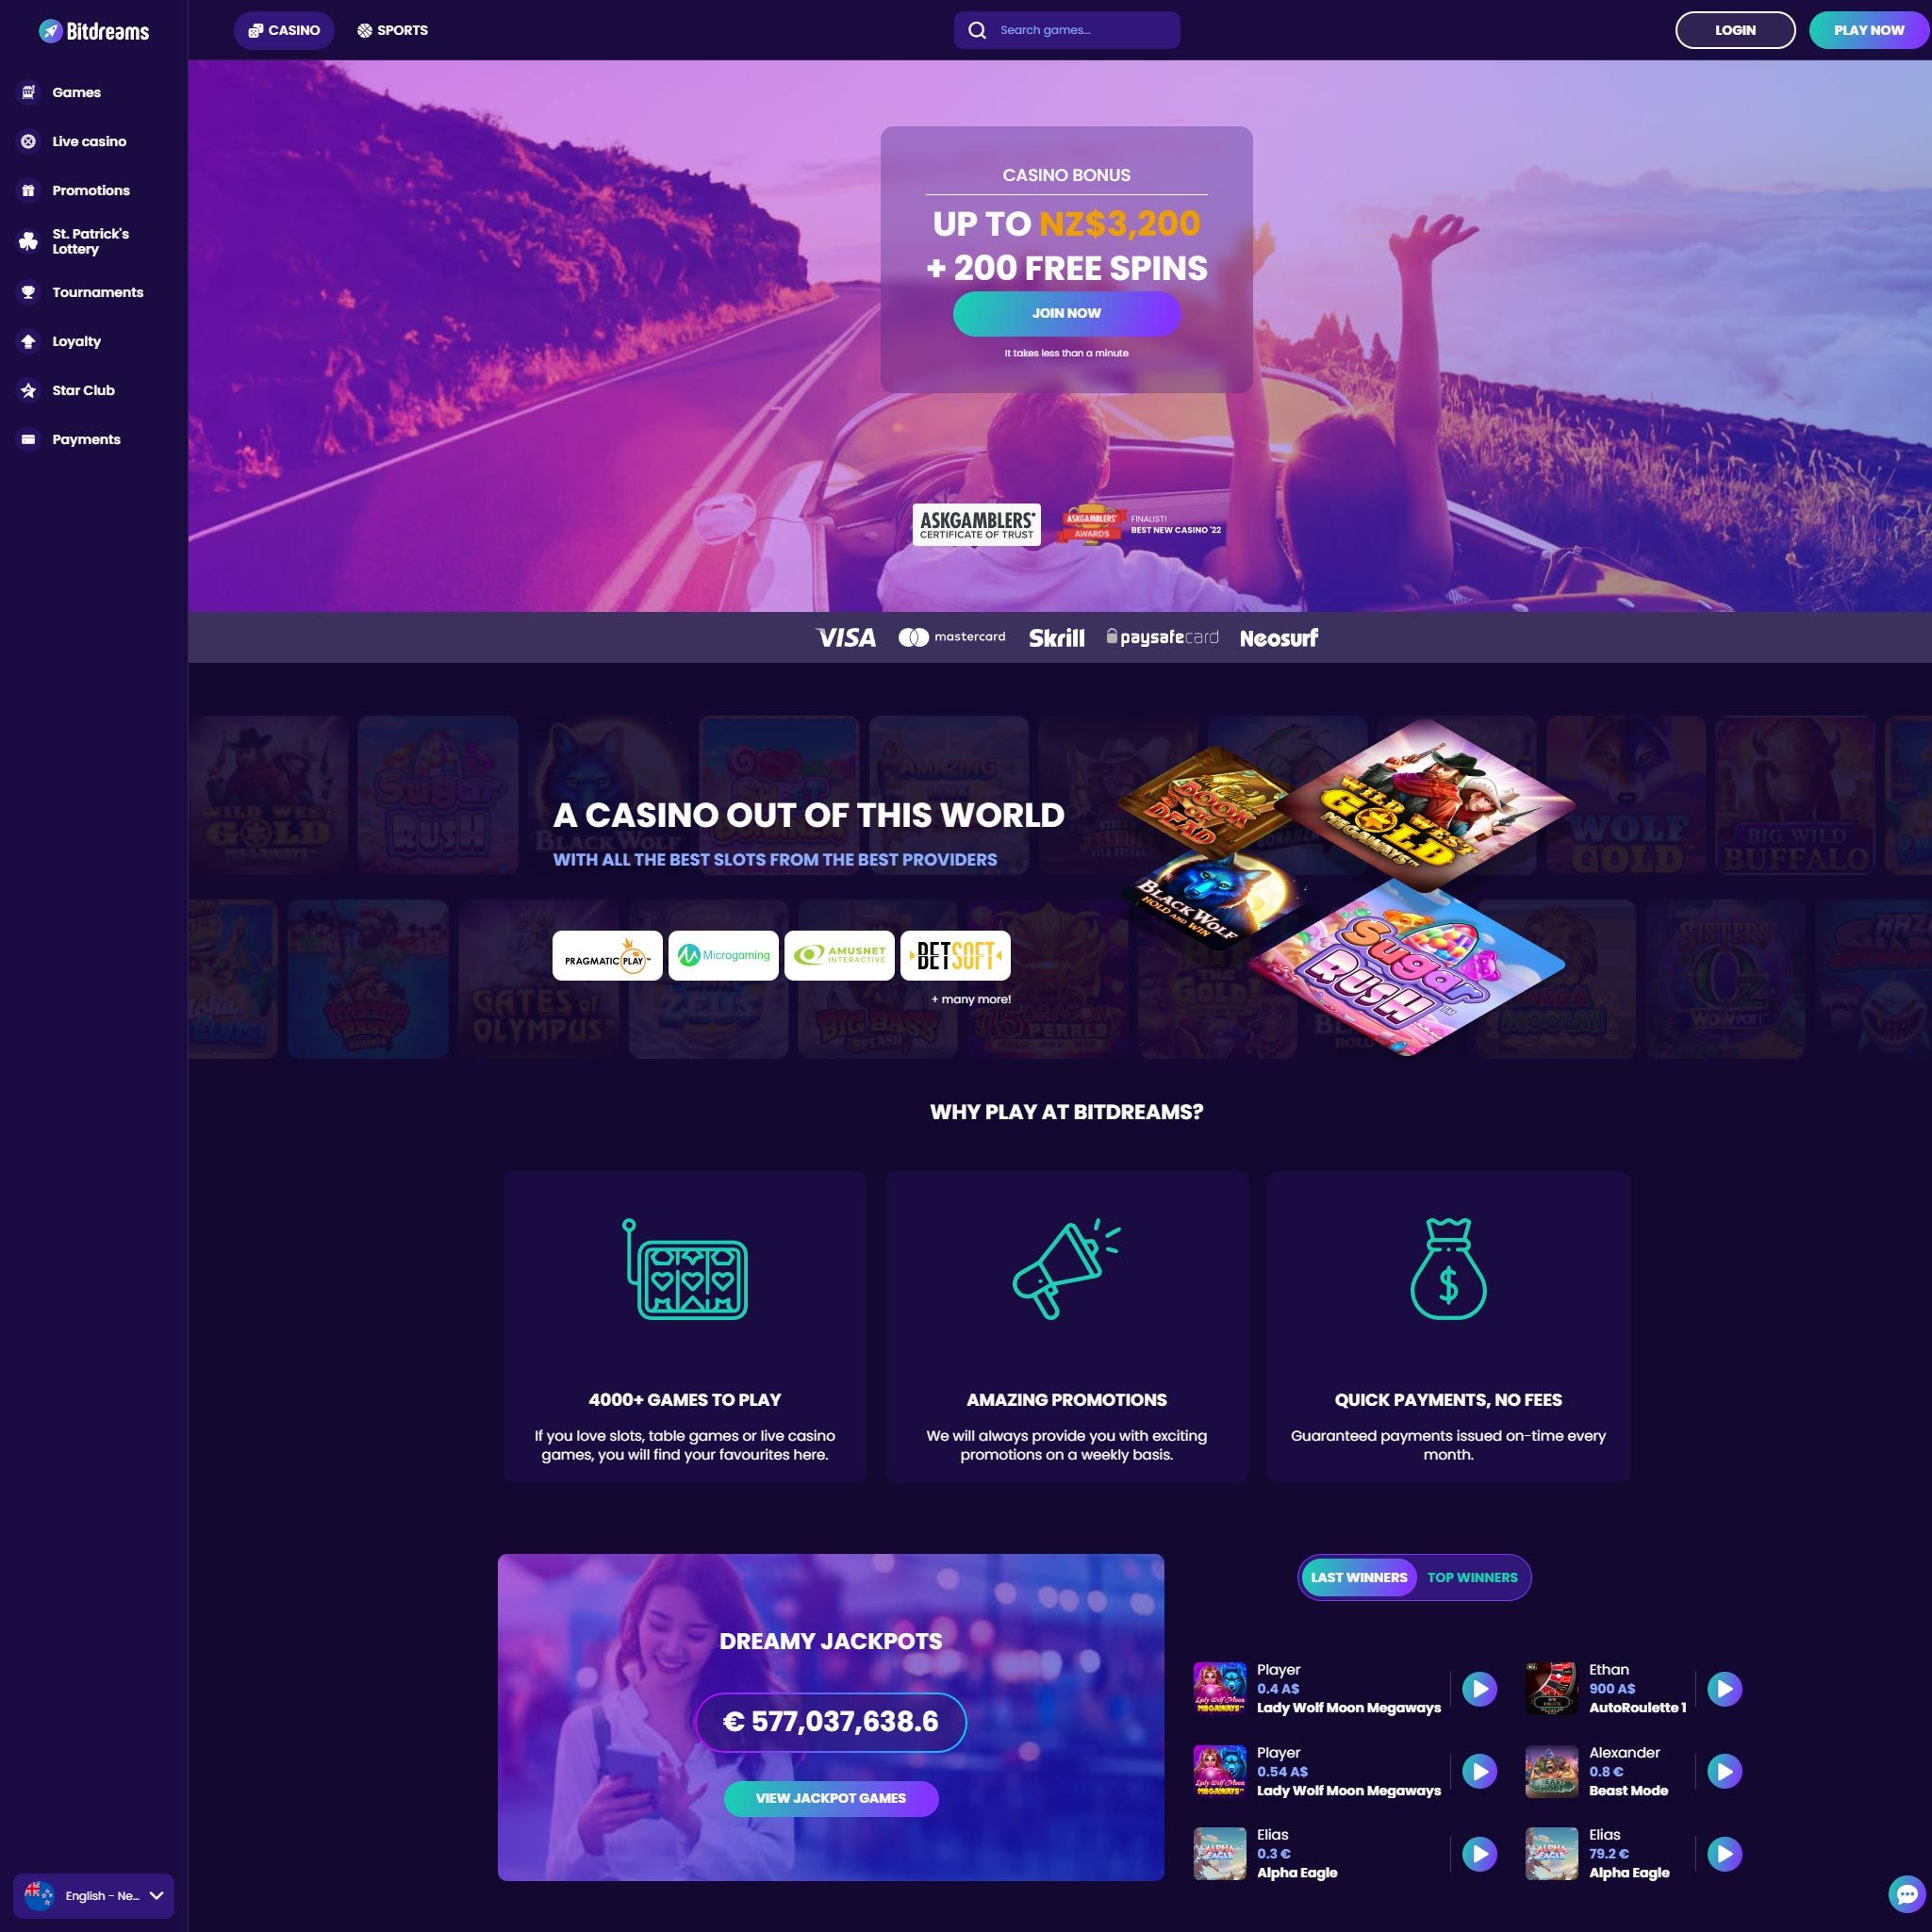 Bitdreams Casino NZ review by Mr. Gamble